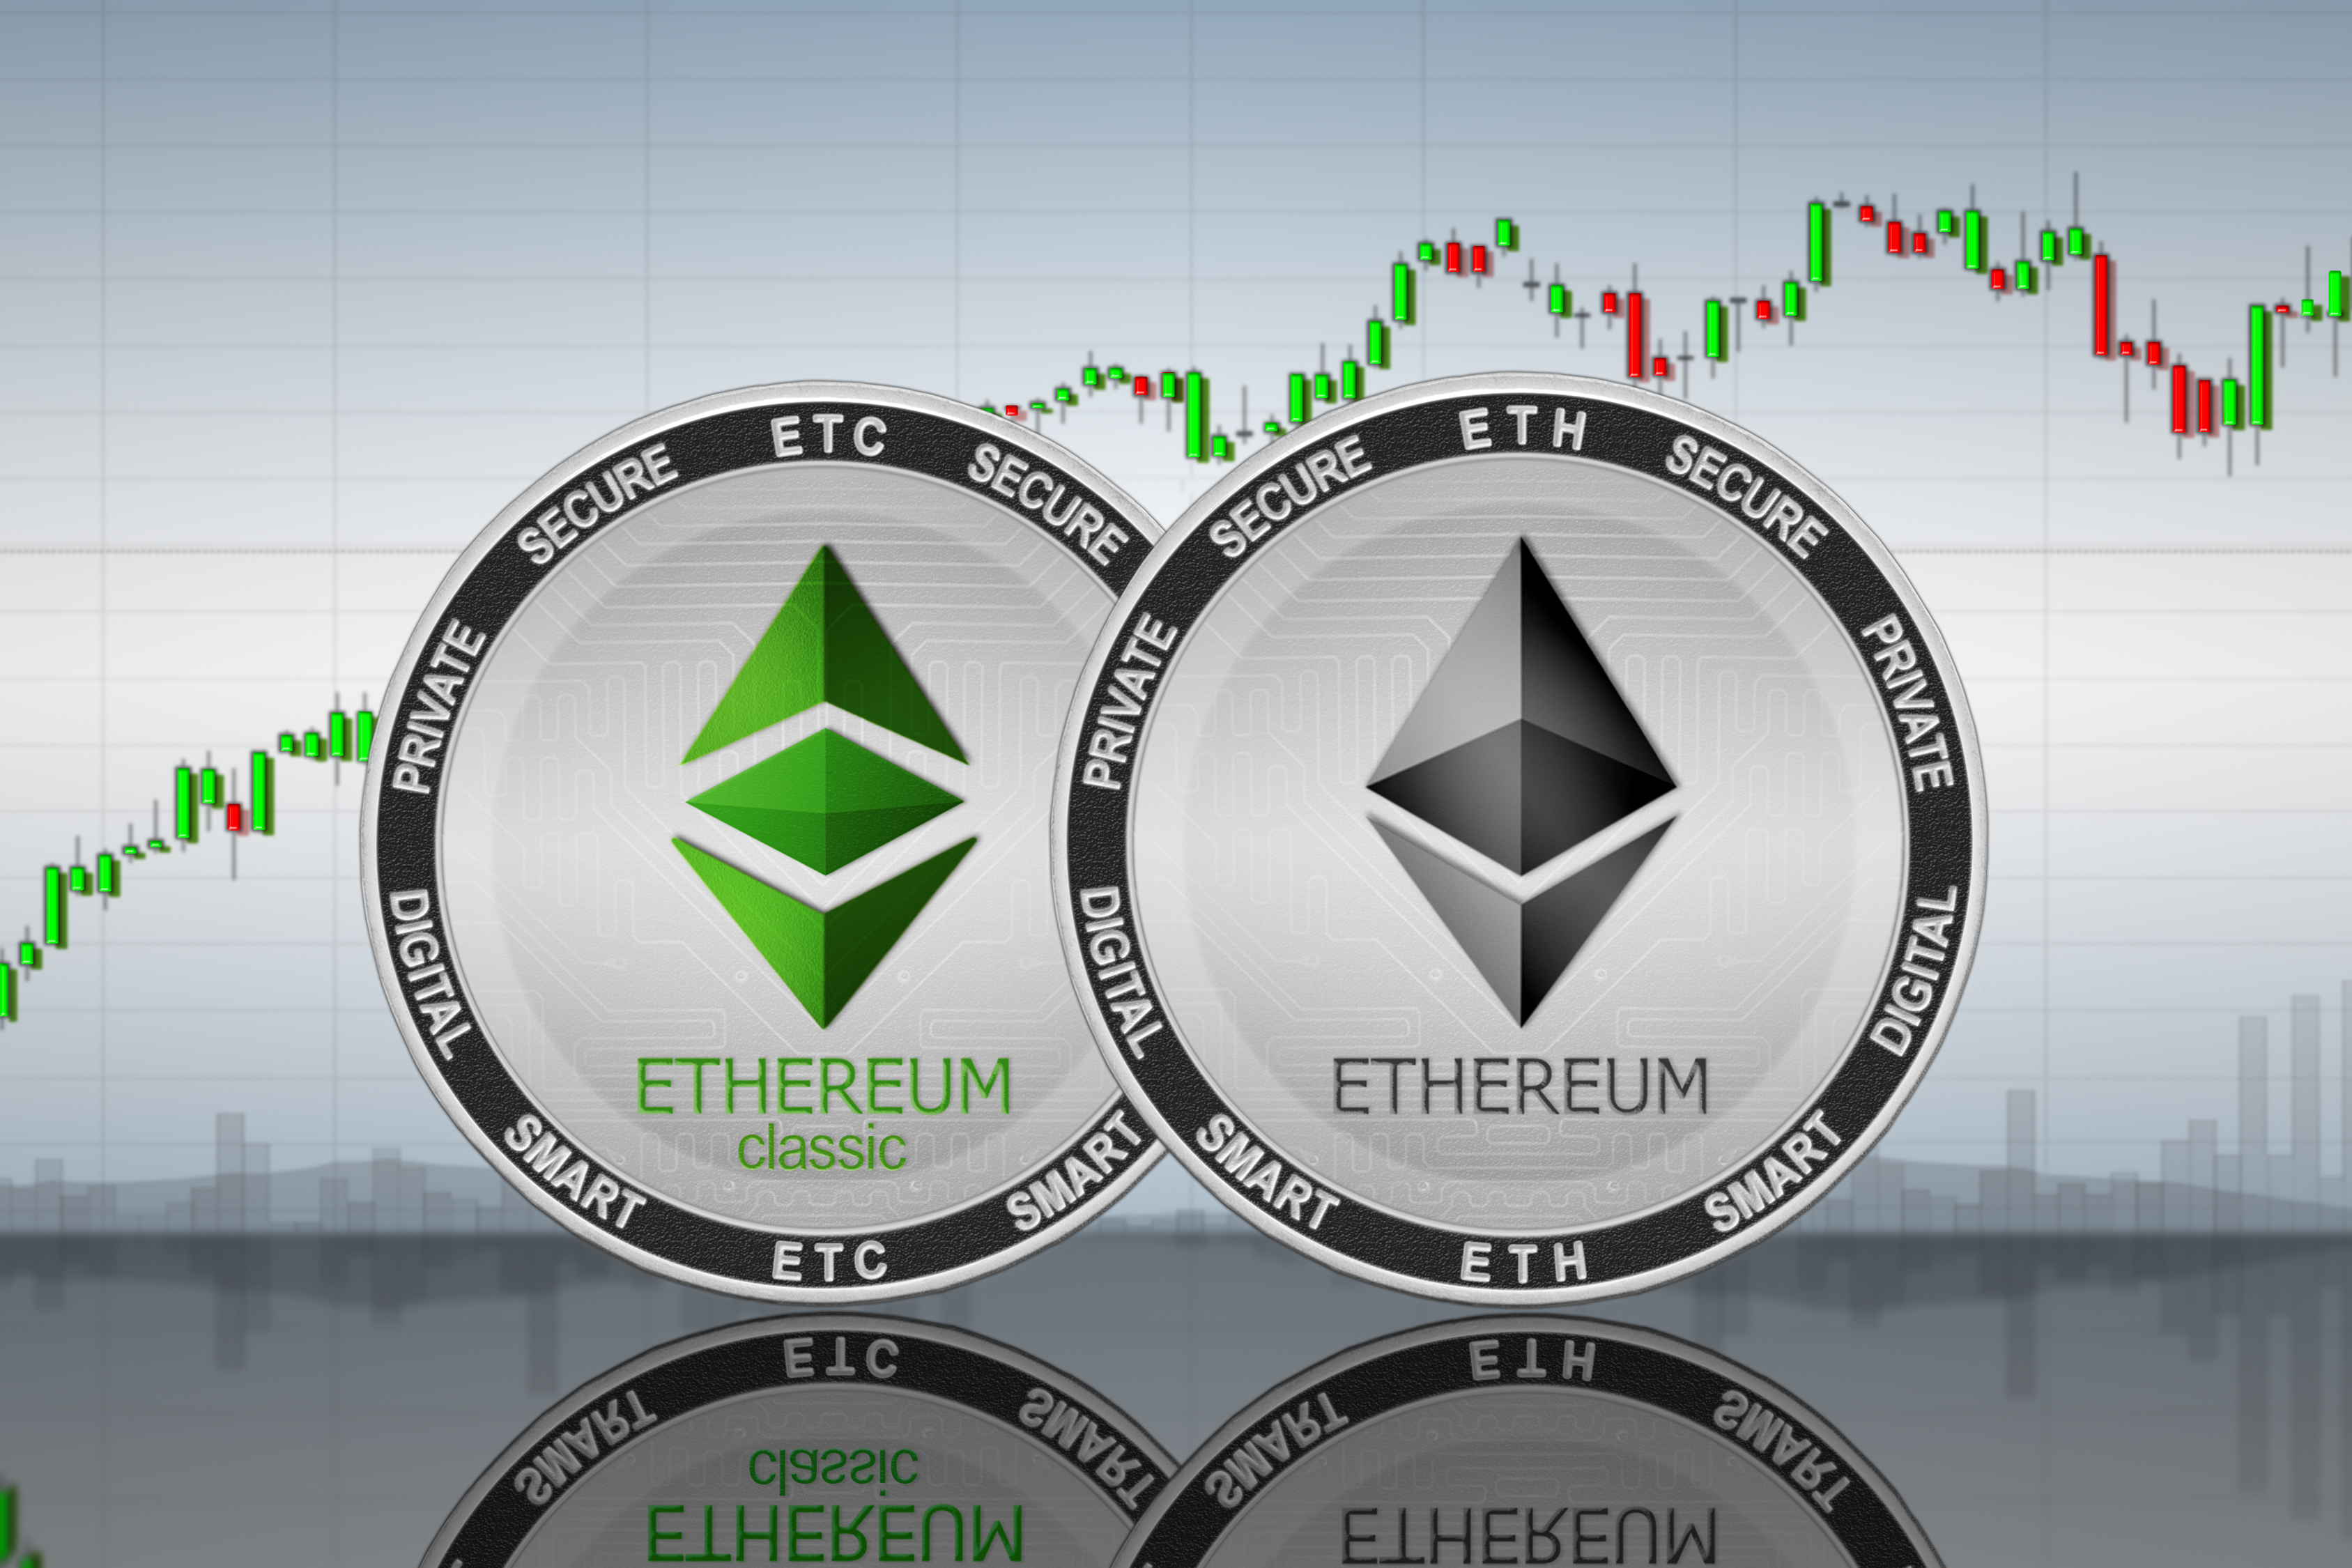 Will ethereum classic continue to rise